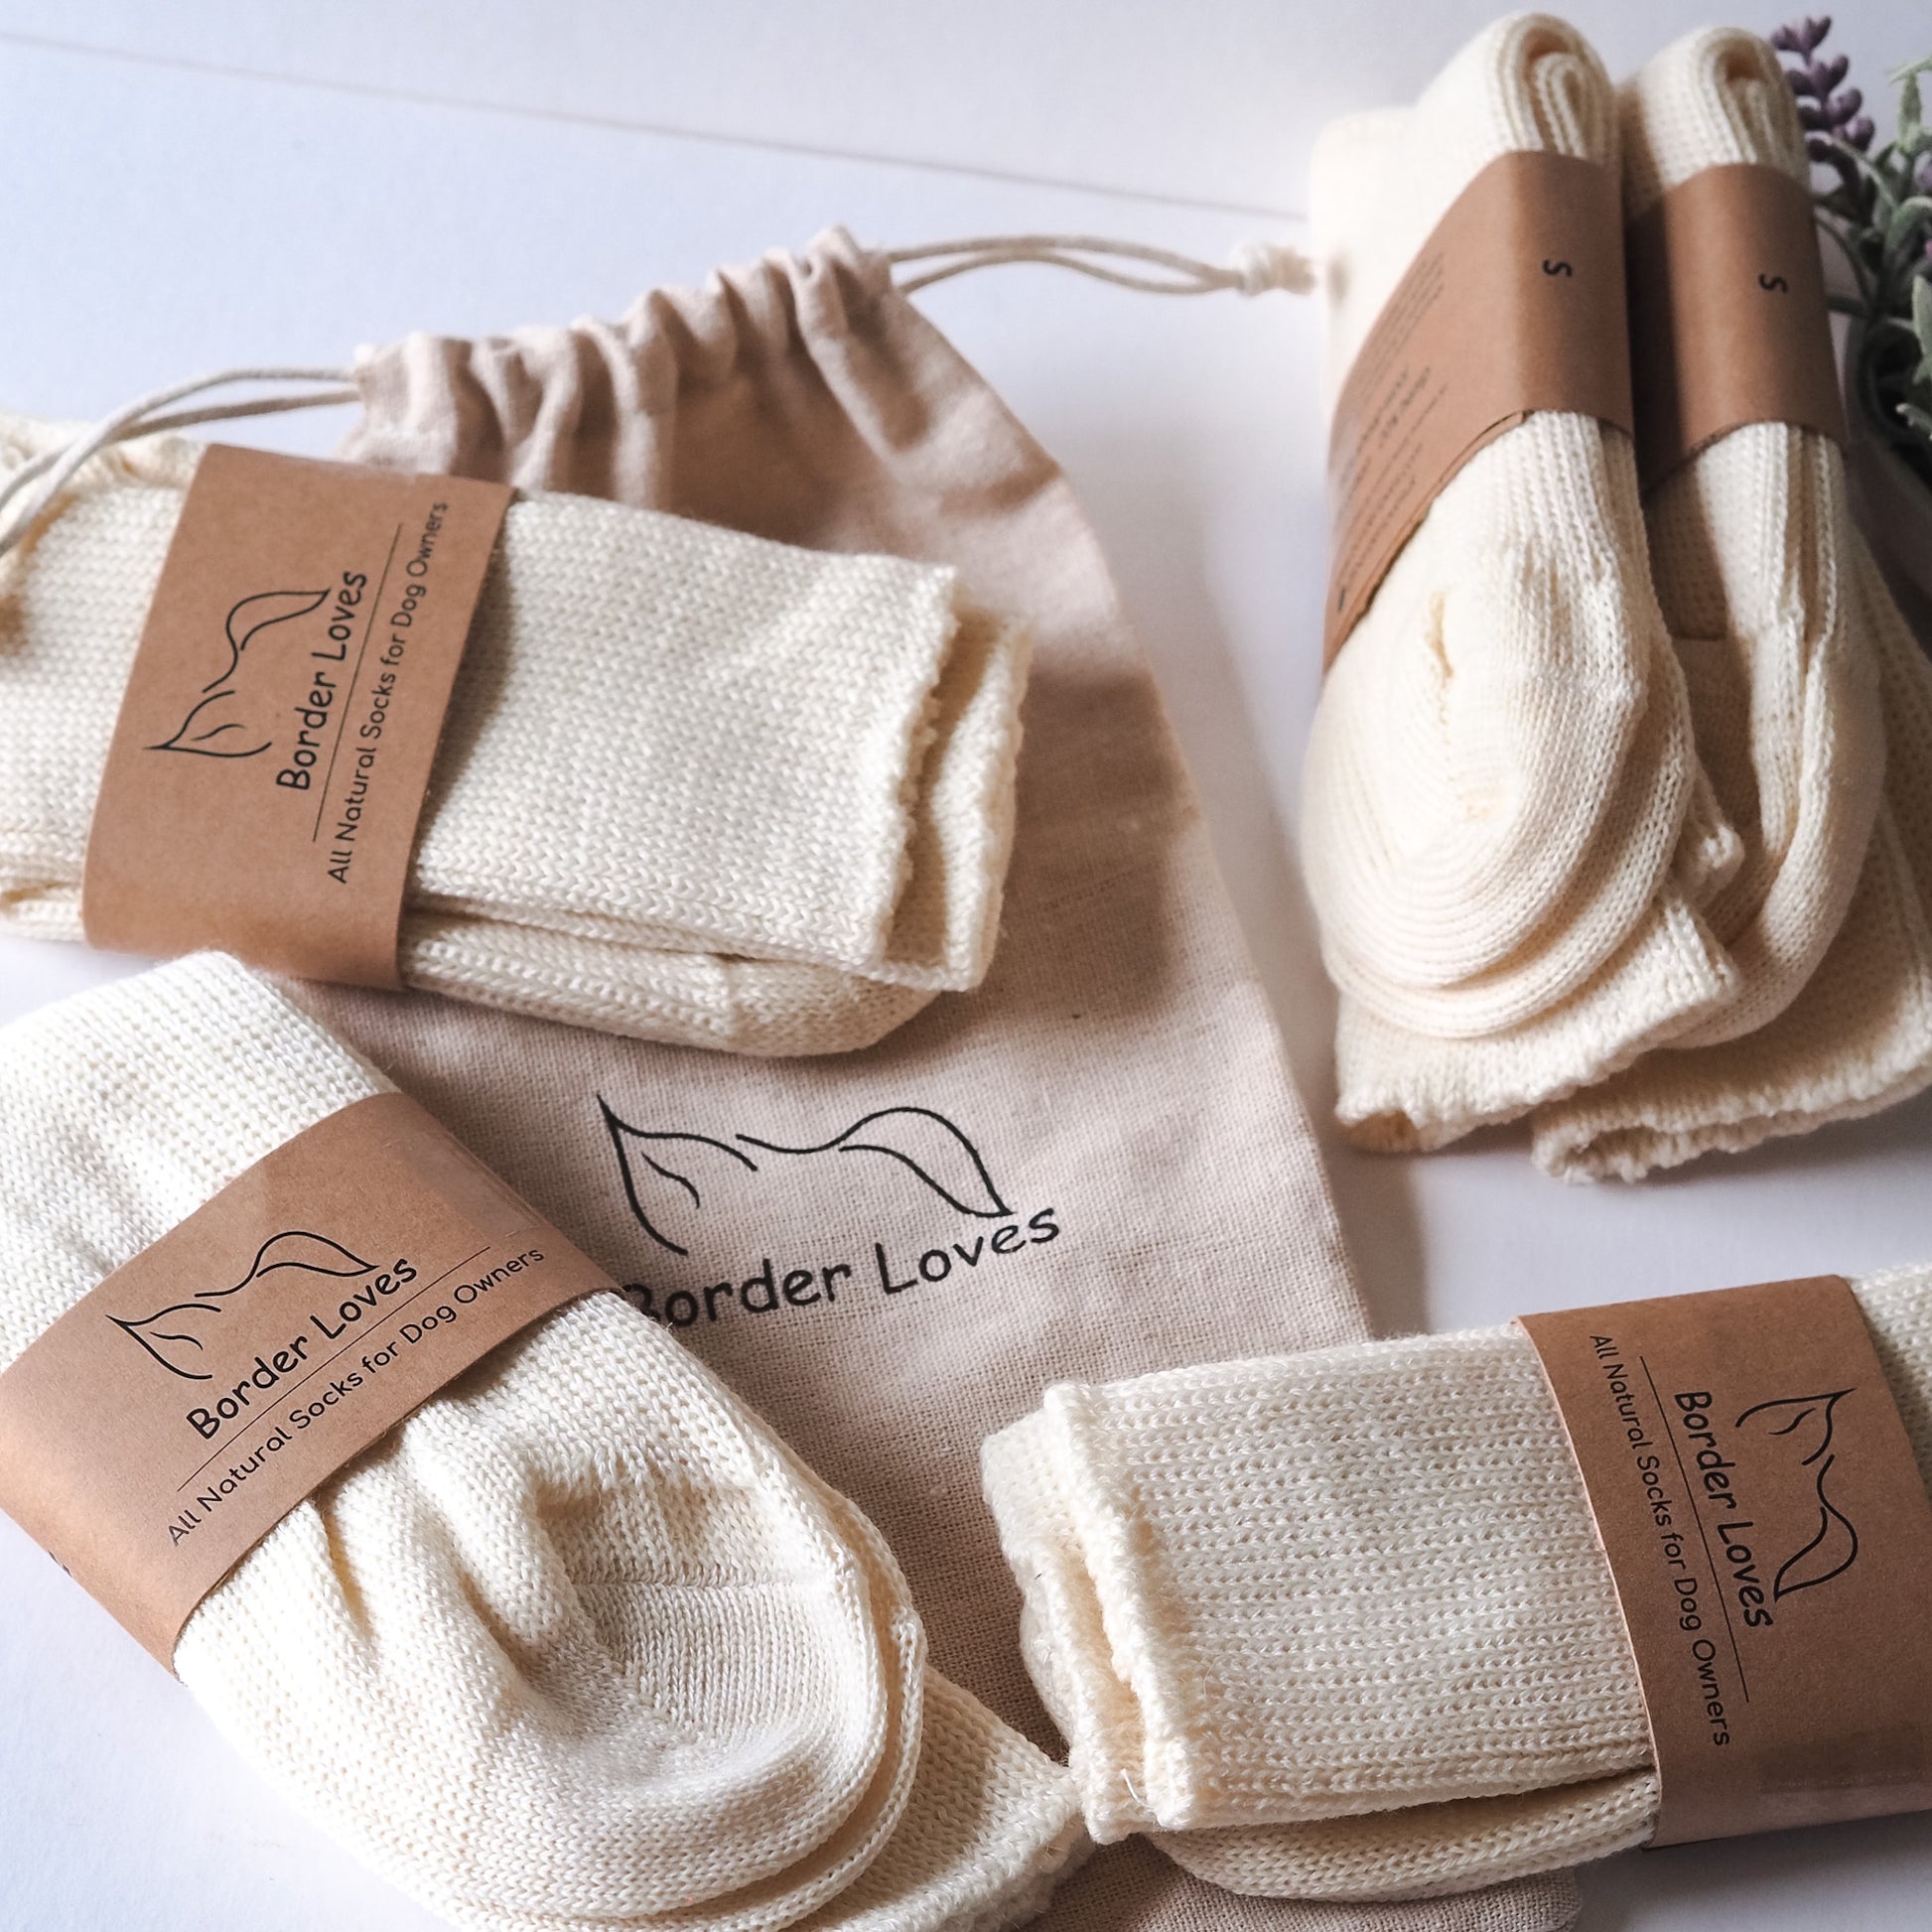 All natural luxury socks together and cotton gift bag by Border Loves